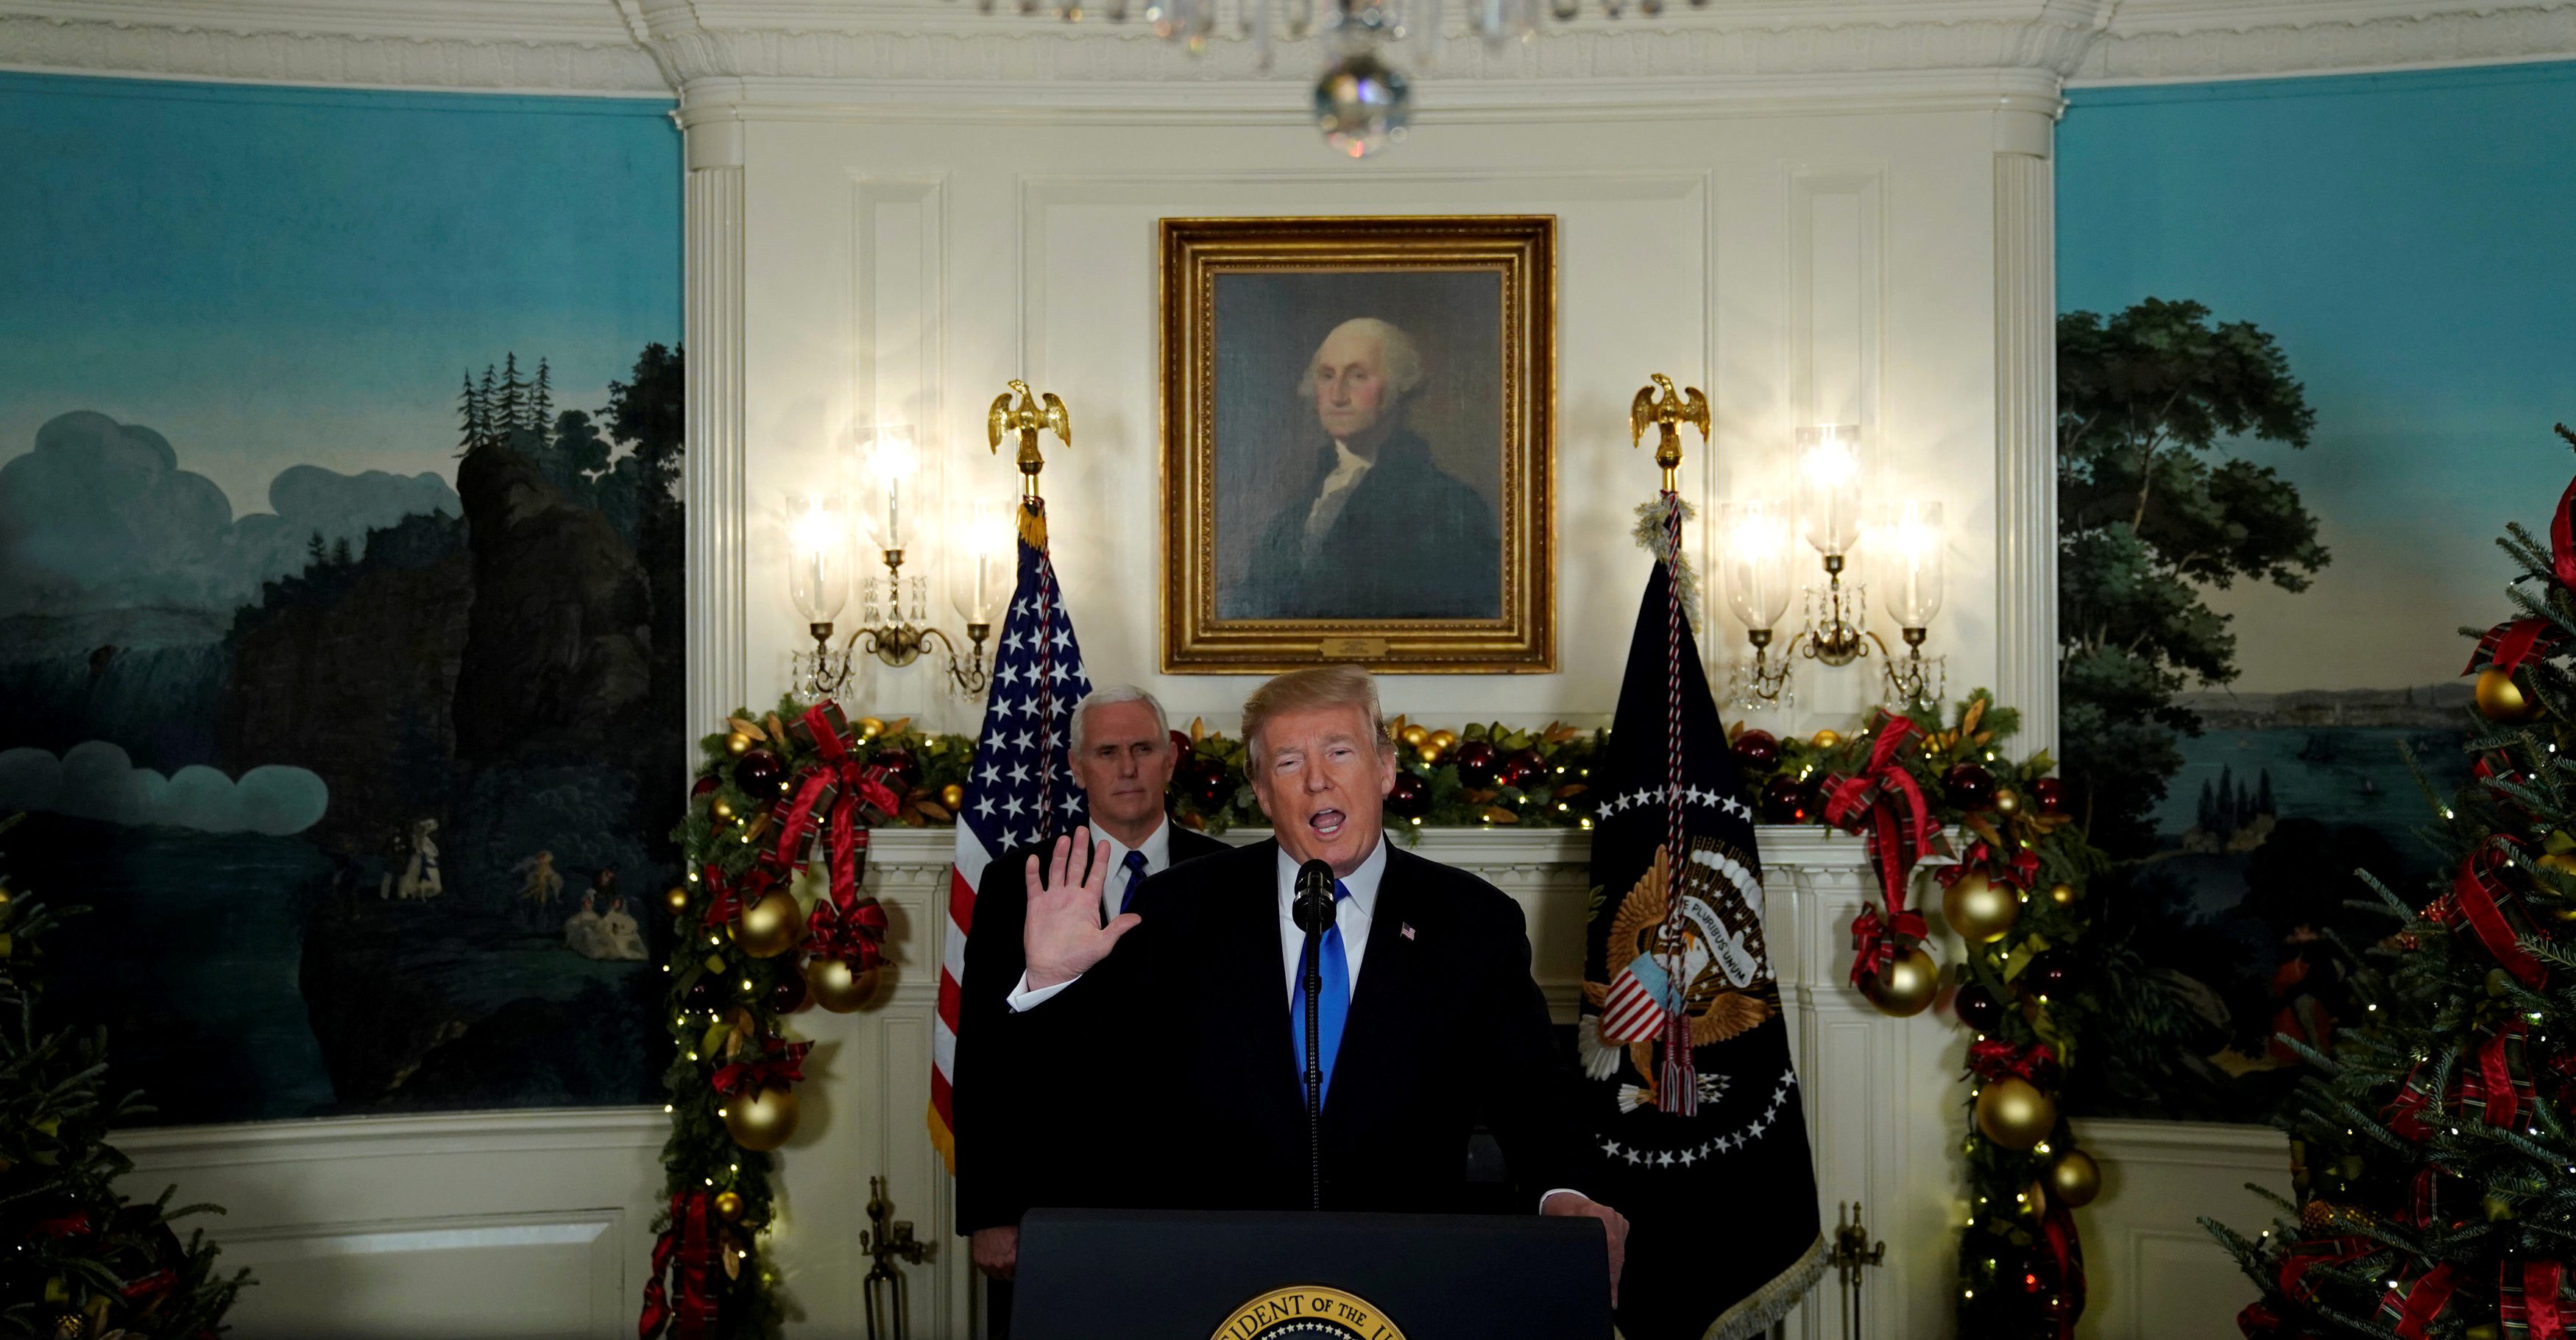 U.S. President Donald Trump, flanked by ?Vice President Mike Pence?, delivers remarks recognizing Jerusalem as the capital of Israel at the White House in Washington, U.S. December 6, 2017. REUTERS/Jonathan Ernst - RC1F9F0D1440